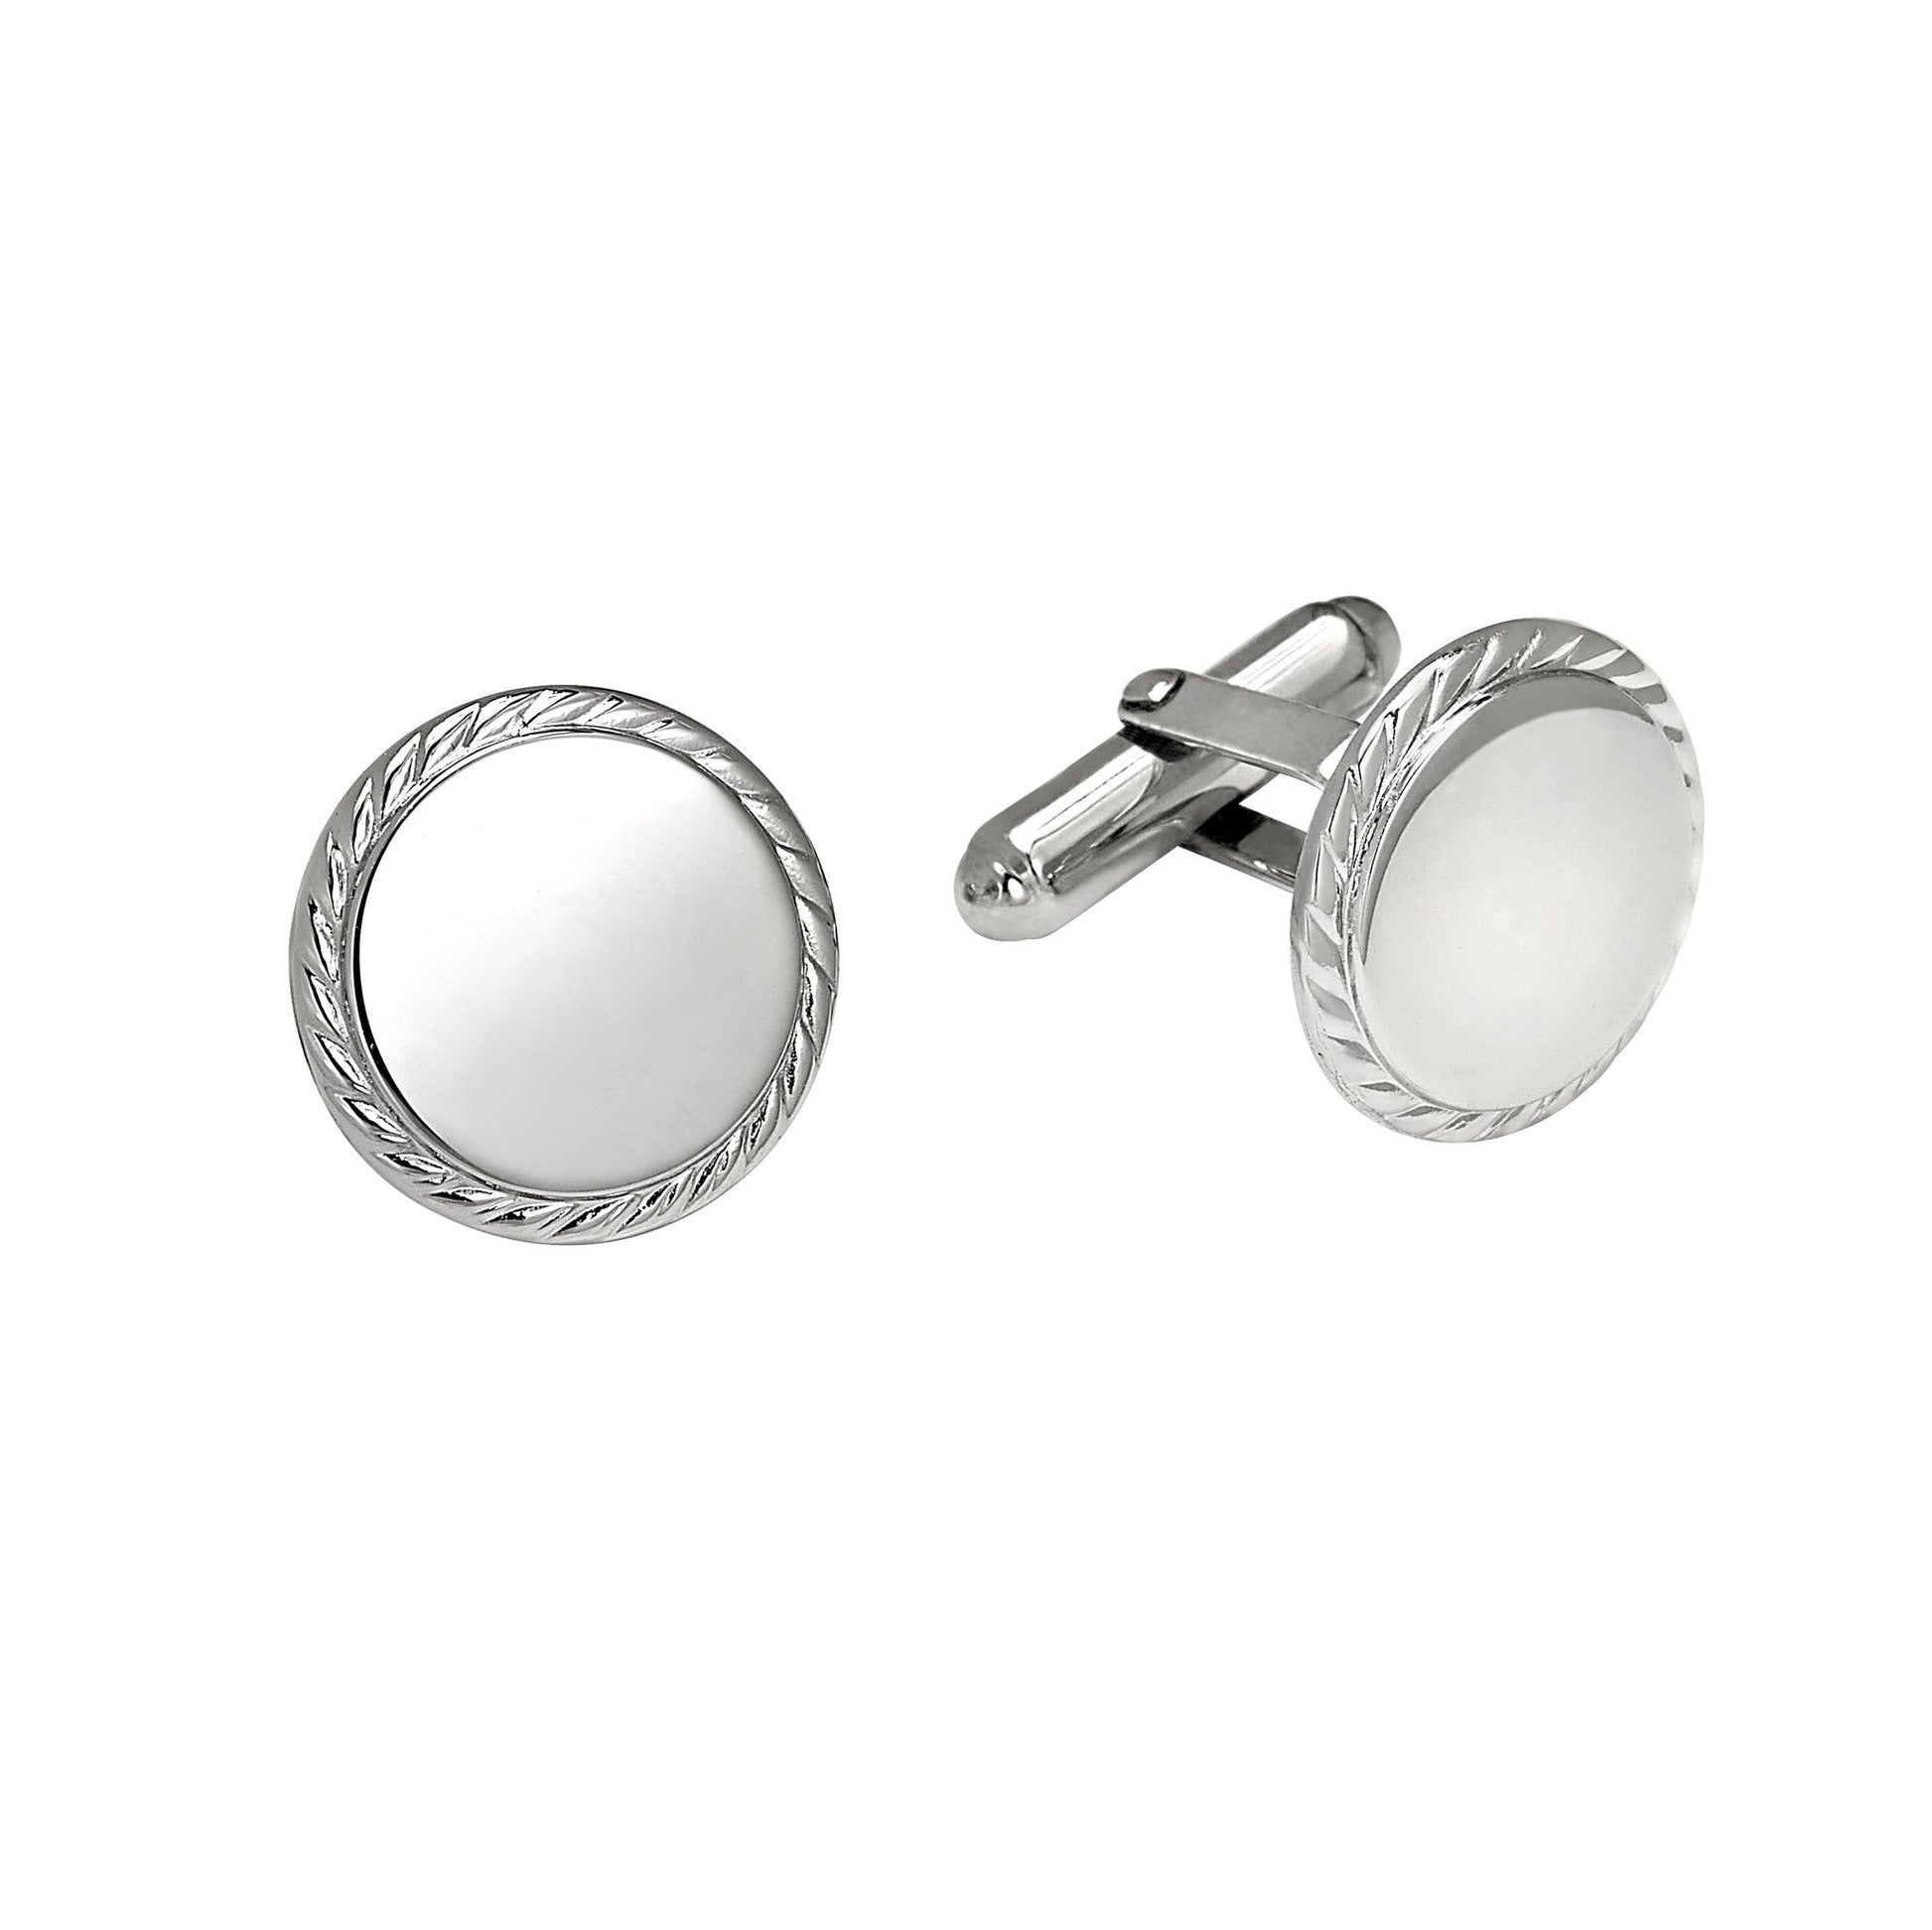 A sterling silver rope edge round polished cufflinks displayed on a neutral white background.